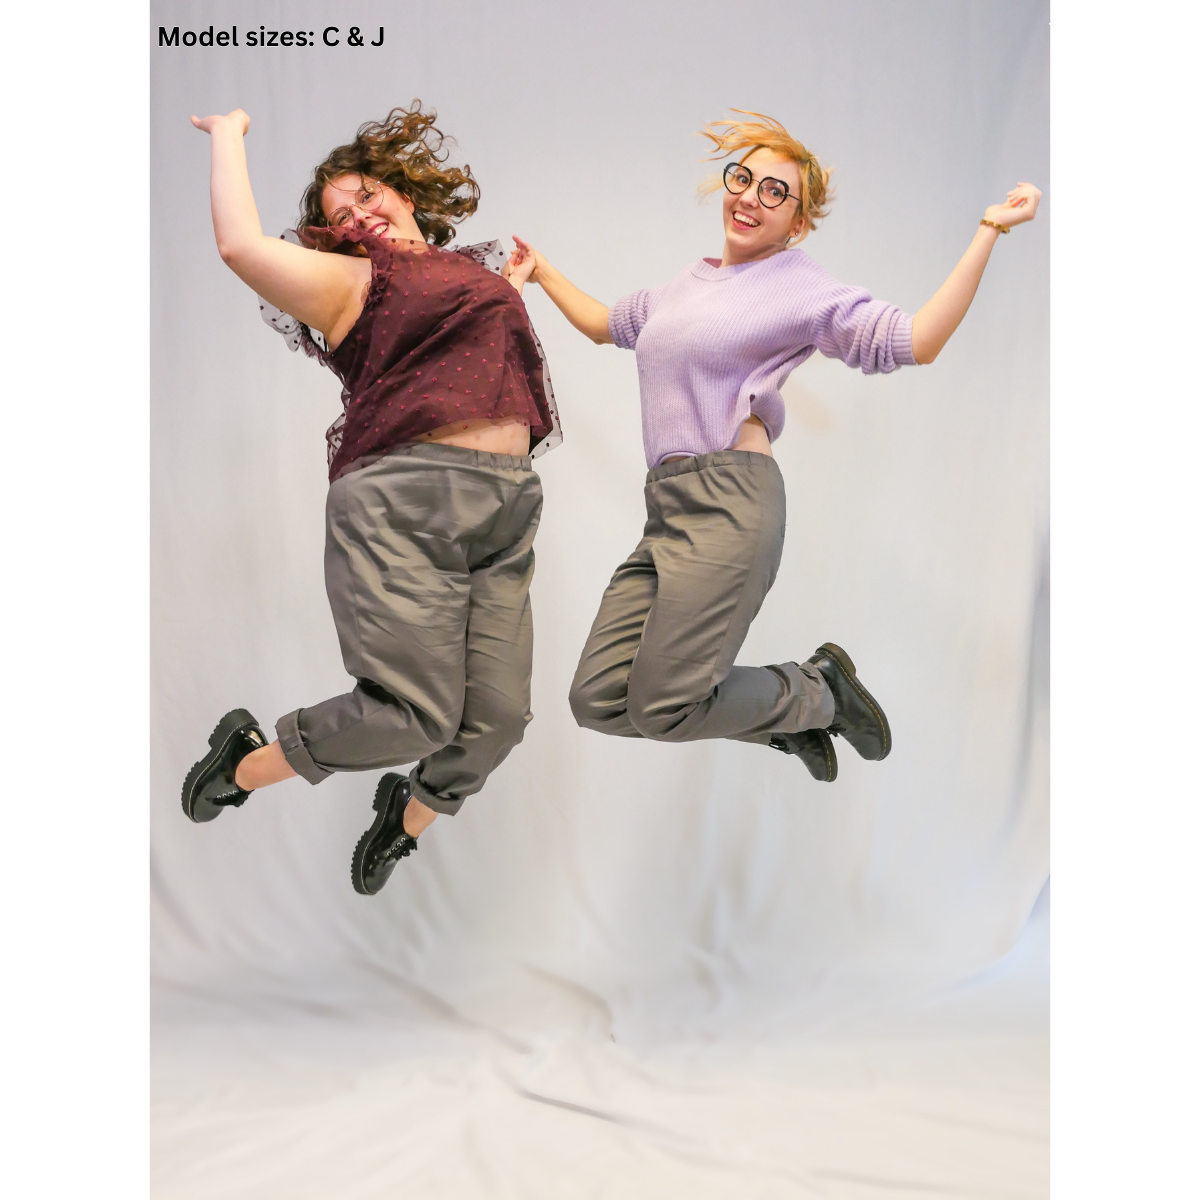 A female size J model and nonbinary size C model jumping in the air while wearing completed Pants. Their arms are out and they're both smiling.